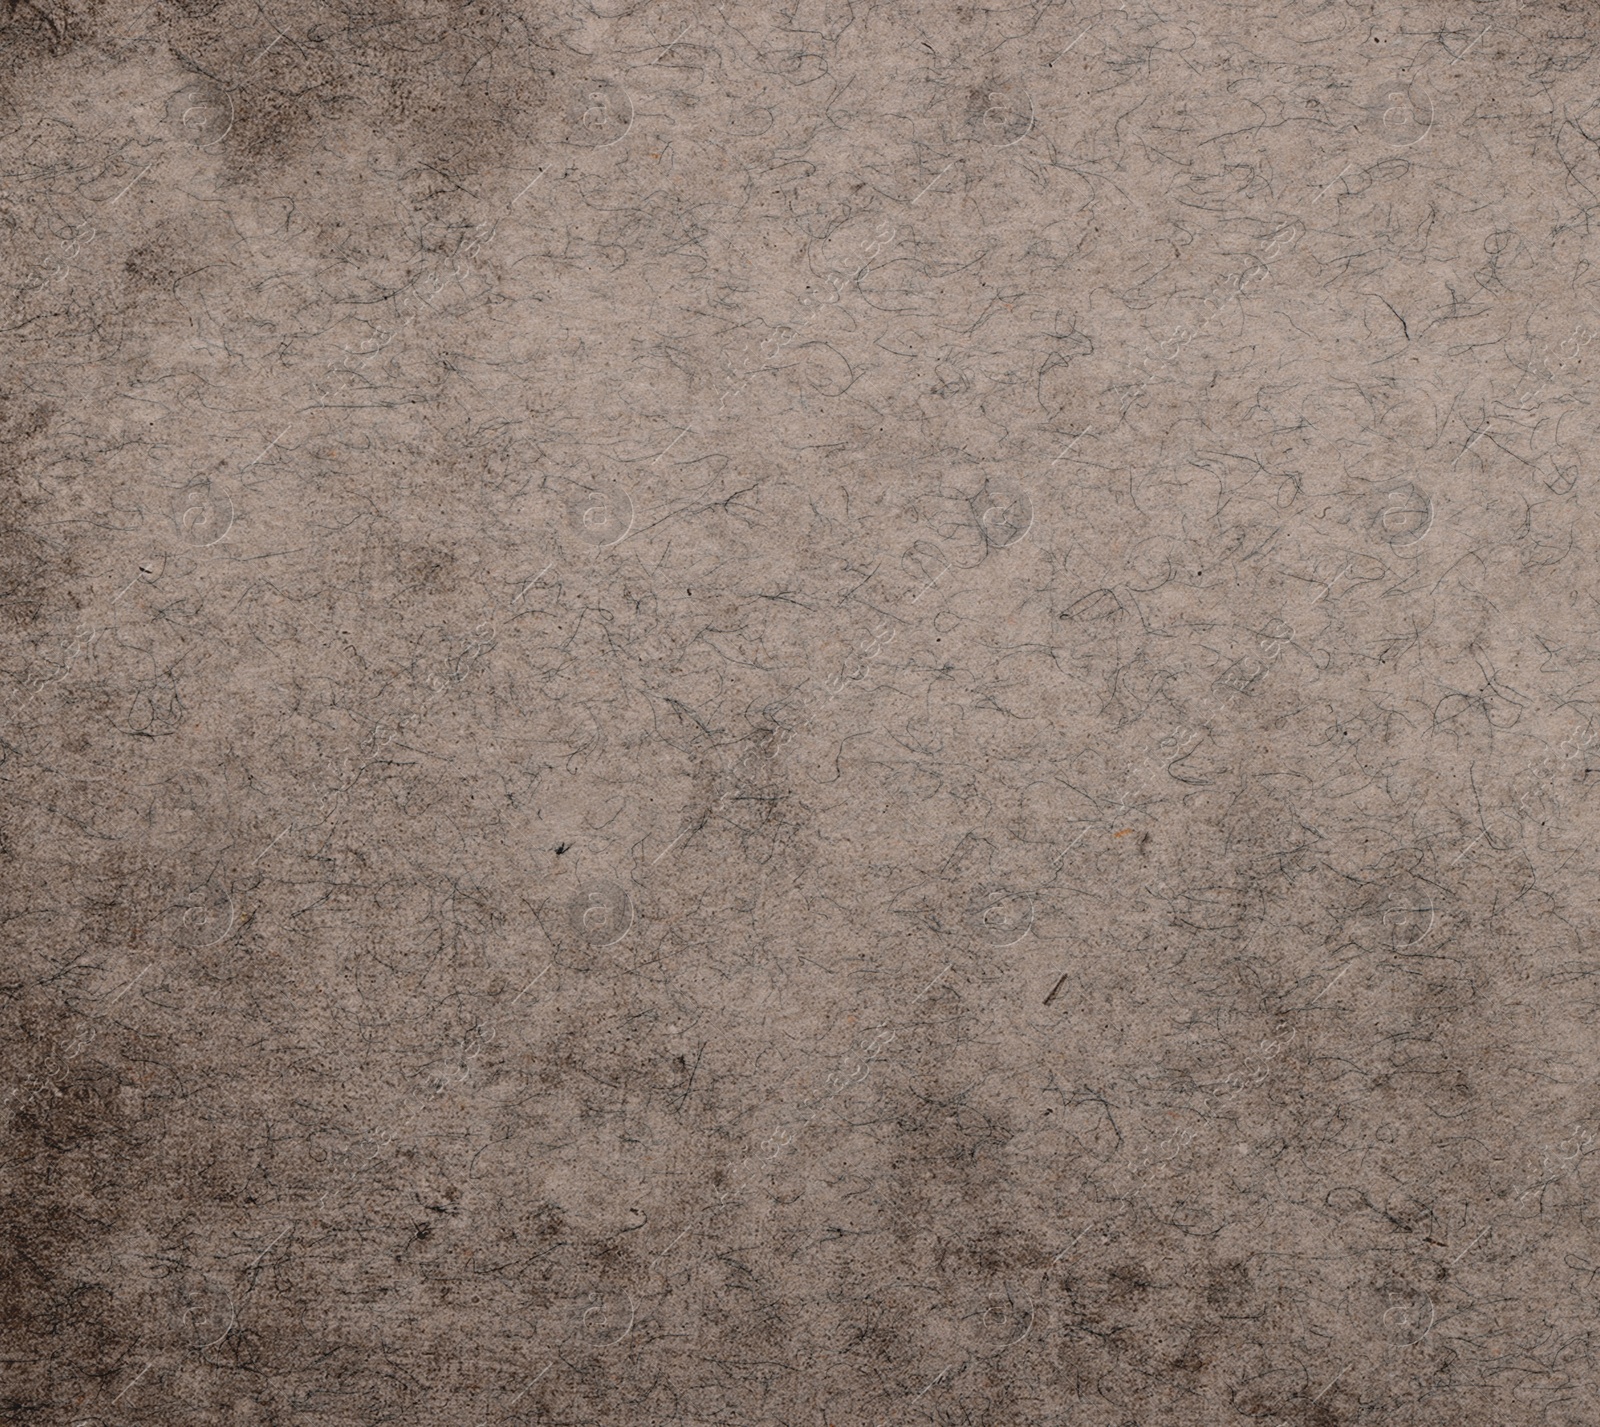 Image of Texture of old paper as background, top view